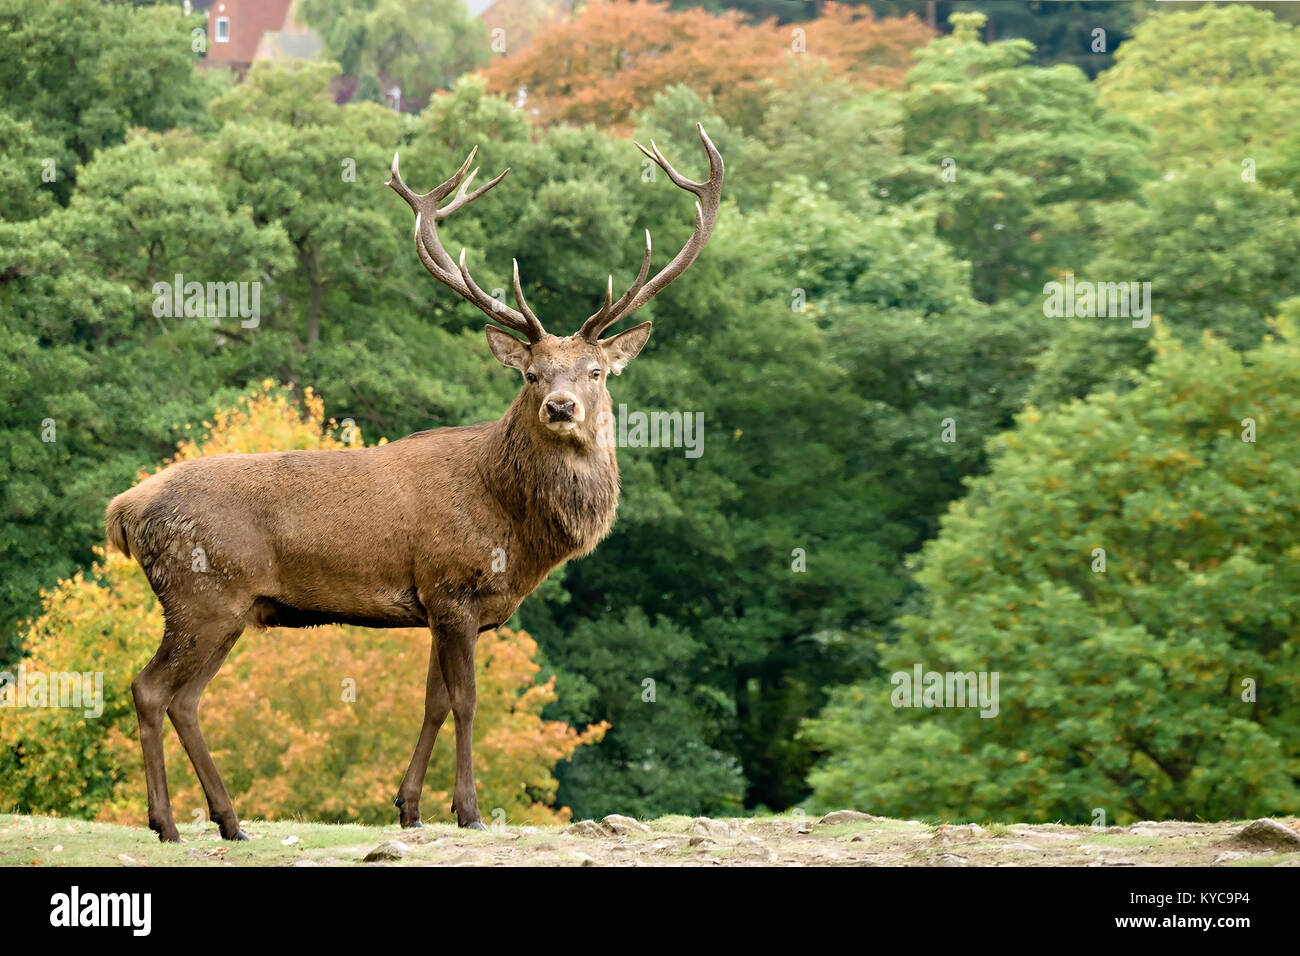 Single large adult male Red Deer Stag (Cervus elaphus) with antlers in Charnwood Forest, Leicestershire, England, UK Stock Photo